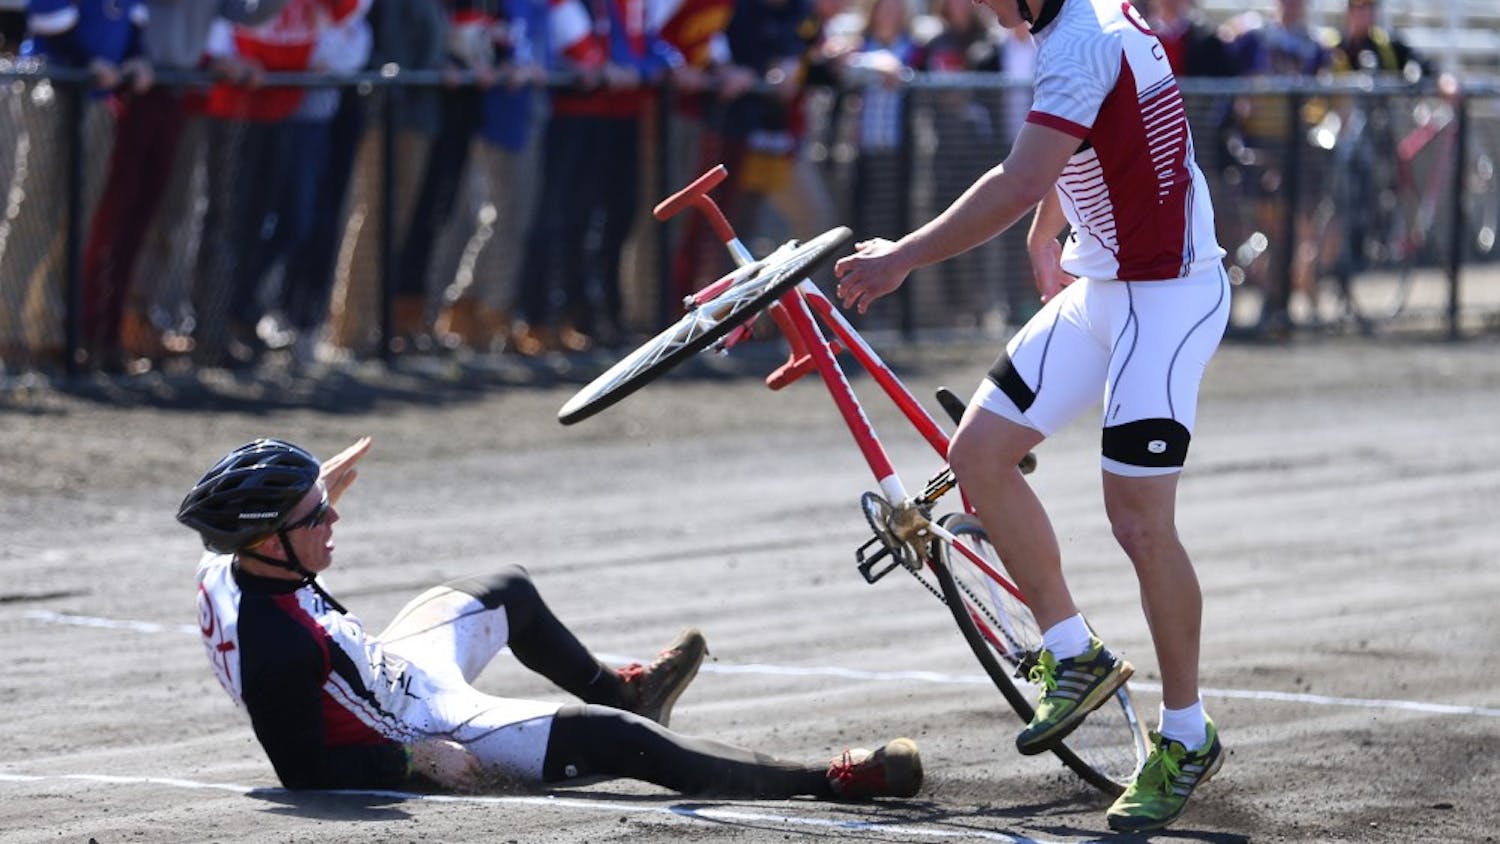 Members of Theta Chi's team fault during an exchange during Little 500 Qualifications on Saturday at Bill Armstrong Stadium. Theta Chi finished in 25th place with a time of 2:32.94.